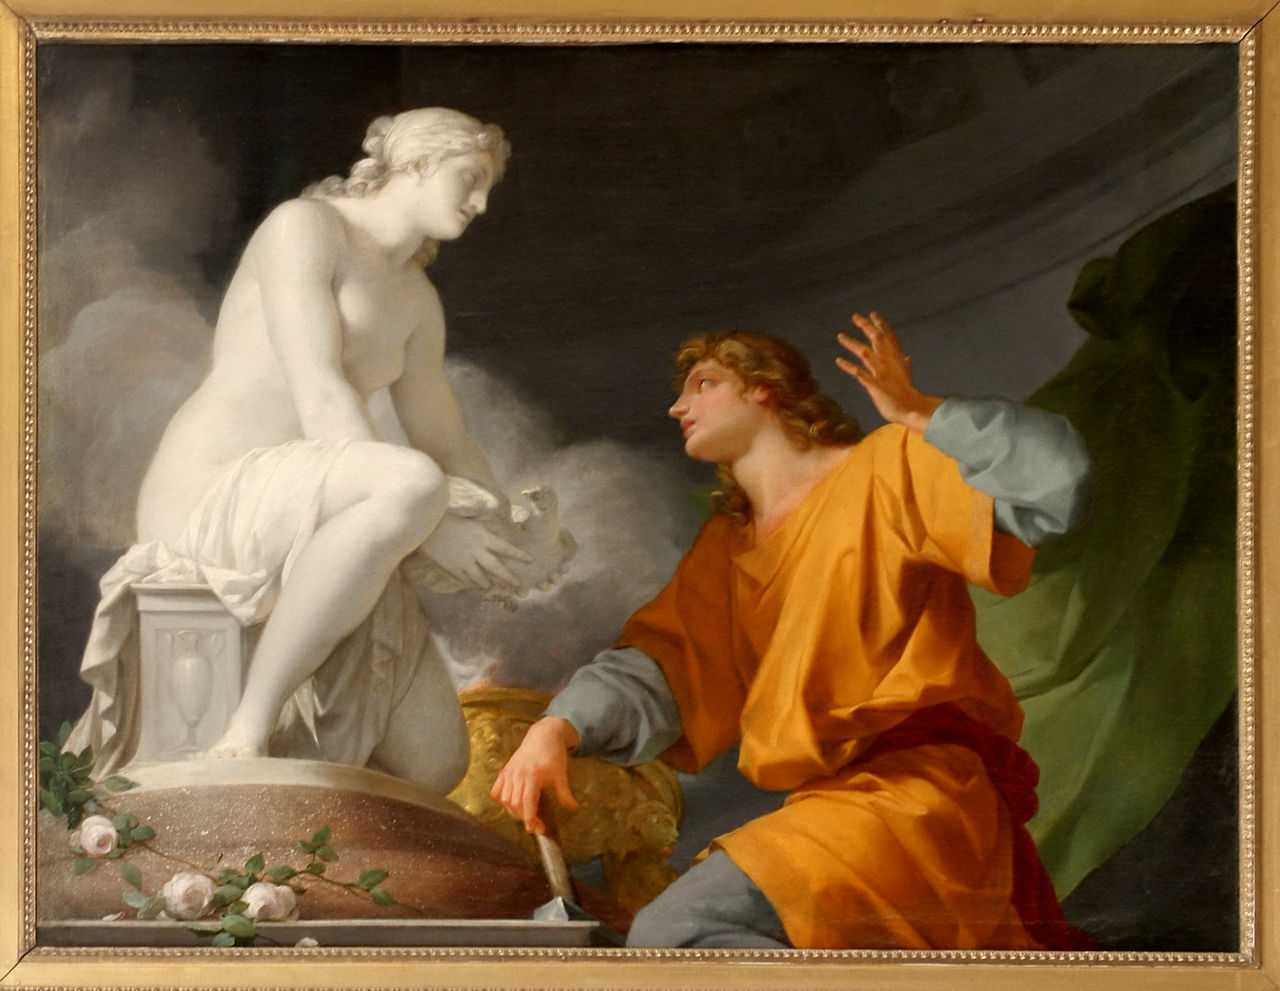 Pygmalion talking to the statue of Galatea, before she became human.